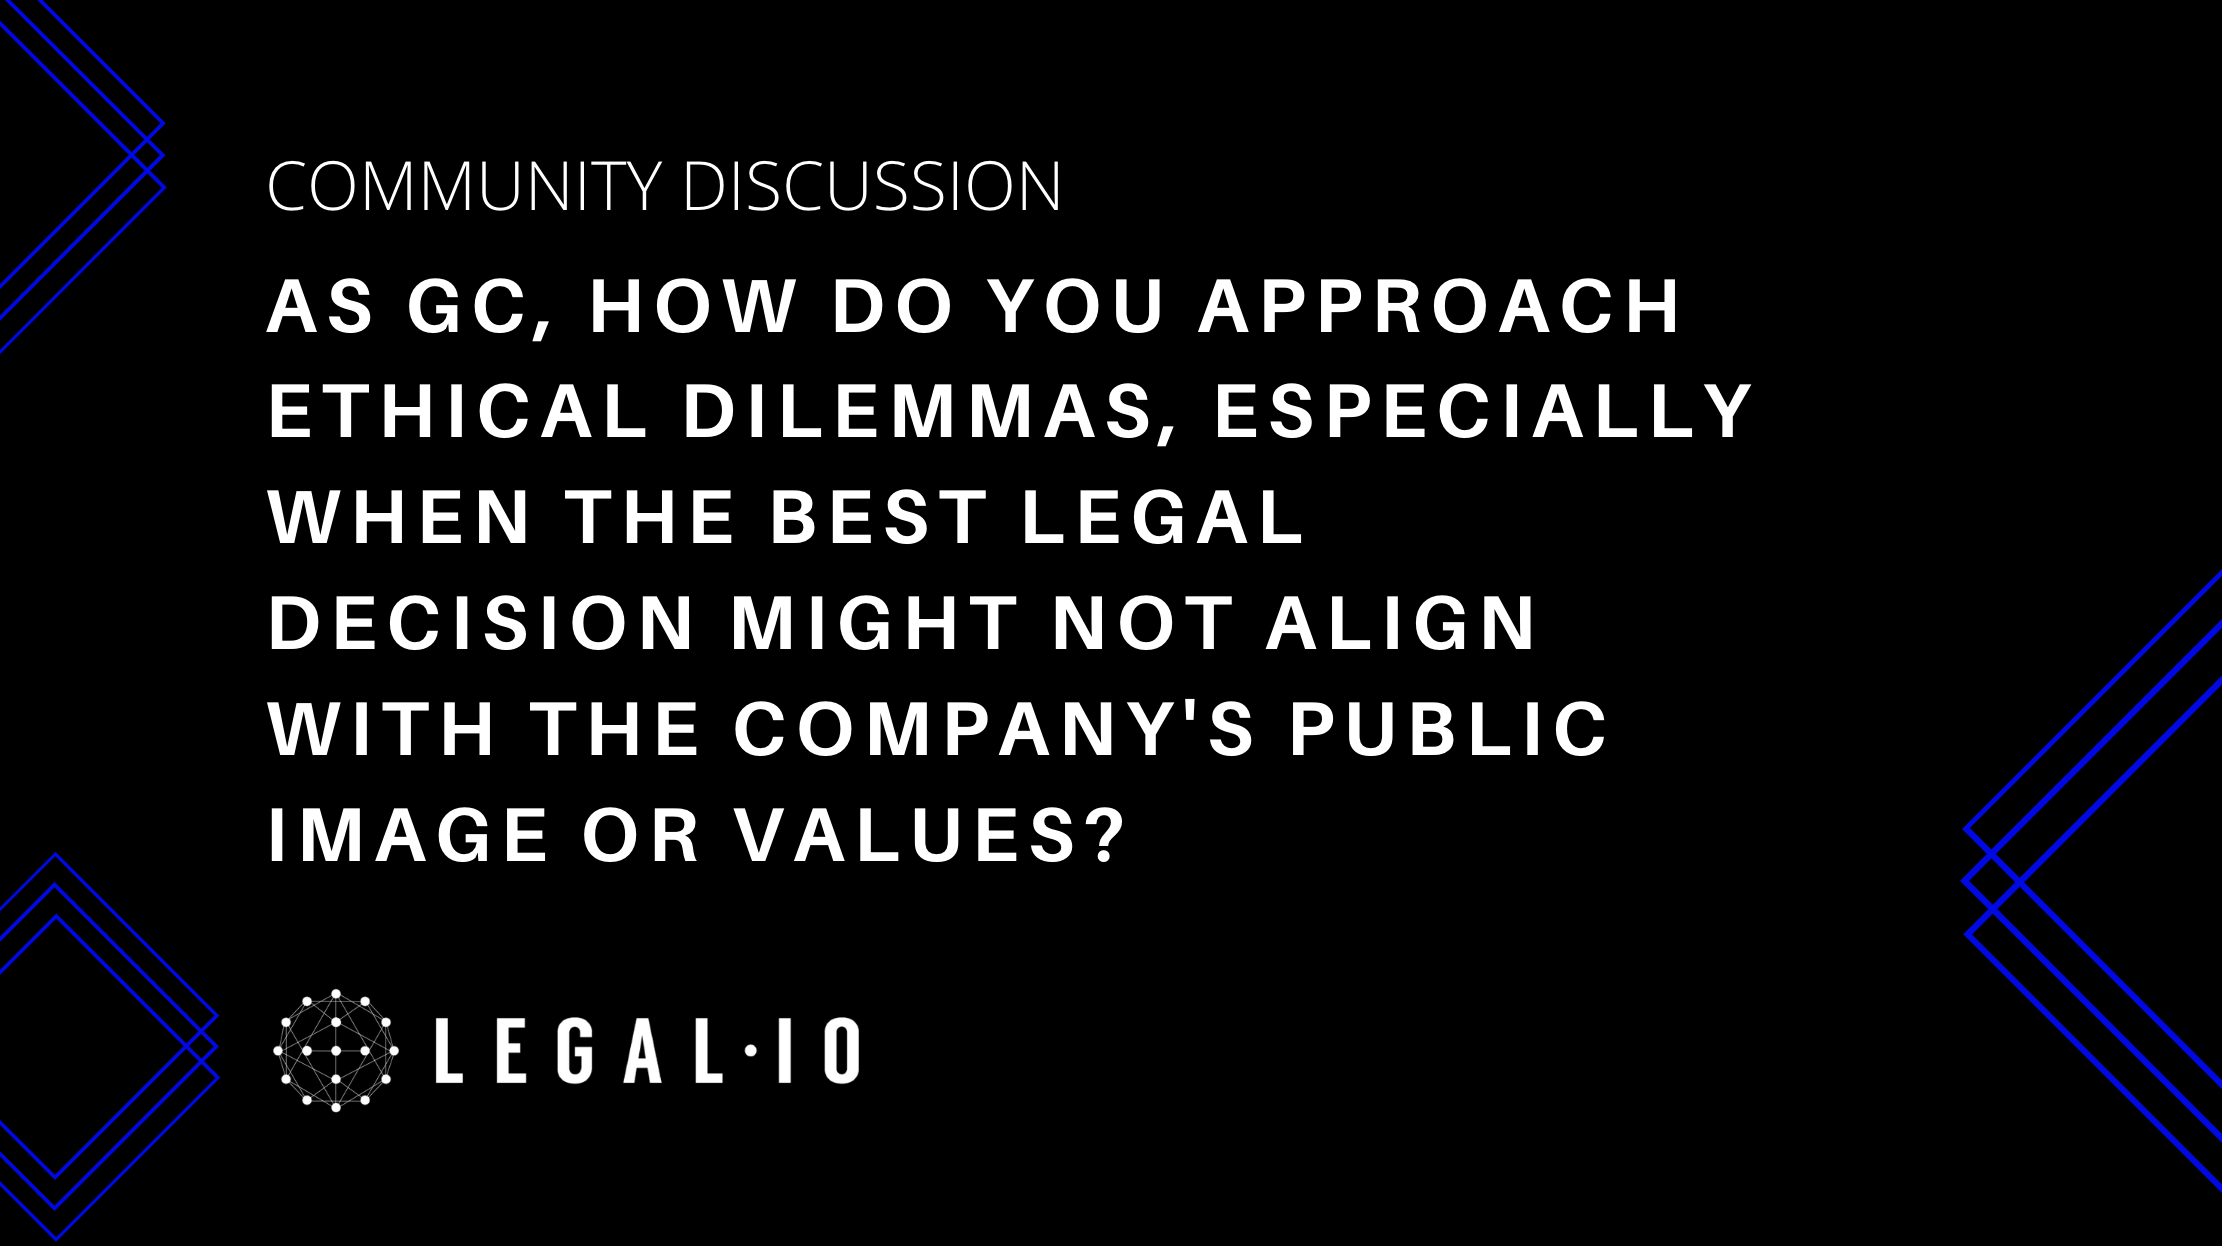 Community Discussion: As GC, how do you approach ethical dilemmas, especially when the best legal decision might not align with the company's public image or values?